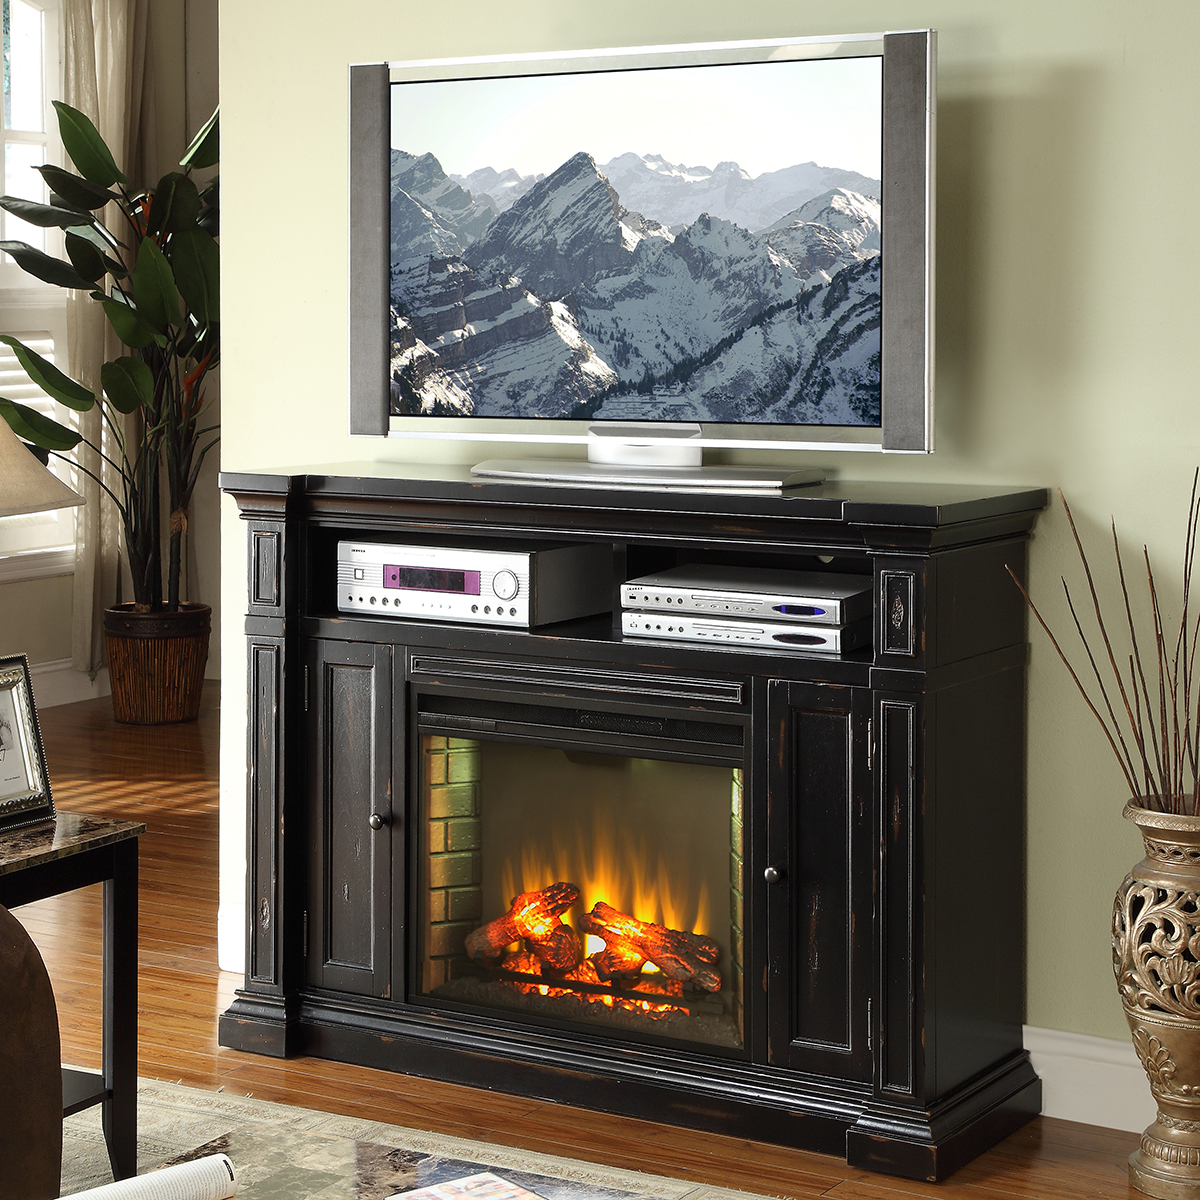 Media Fireplace Beautiful Manchester 58" Fireplace Media Center Tv Stand Mantel In